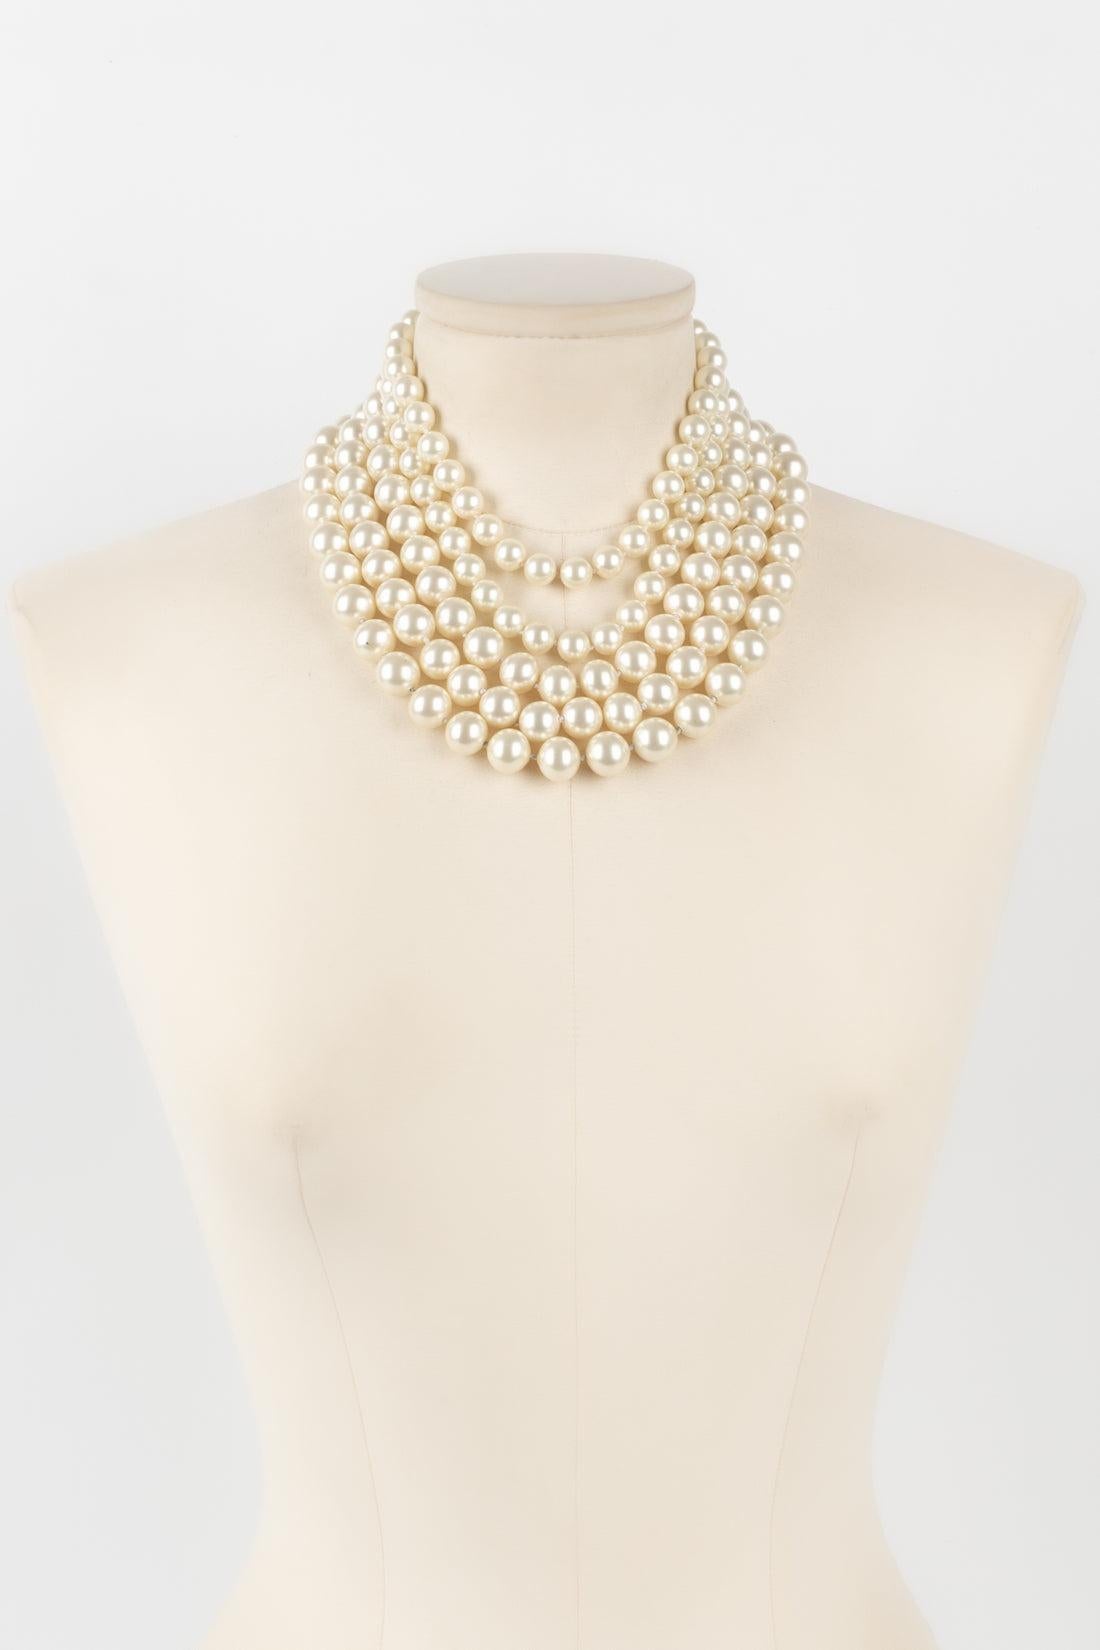 Chanel - (Made in France) Golden metal choker with different rows of costume pearls. Jewelry from the 1980s.

Additional information:
Condition: Very good condition
Dimensions: Length: from 44 cm to 46 cm
Period: 20th Century

Seller Reference: CB199